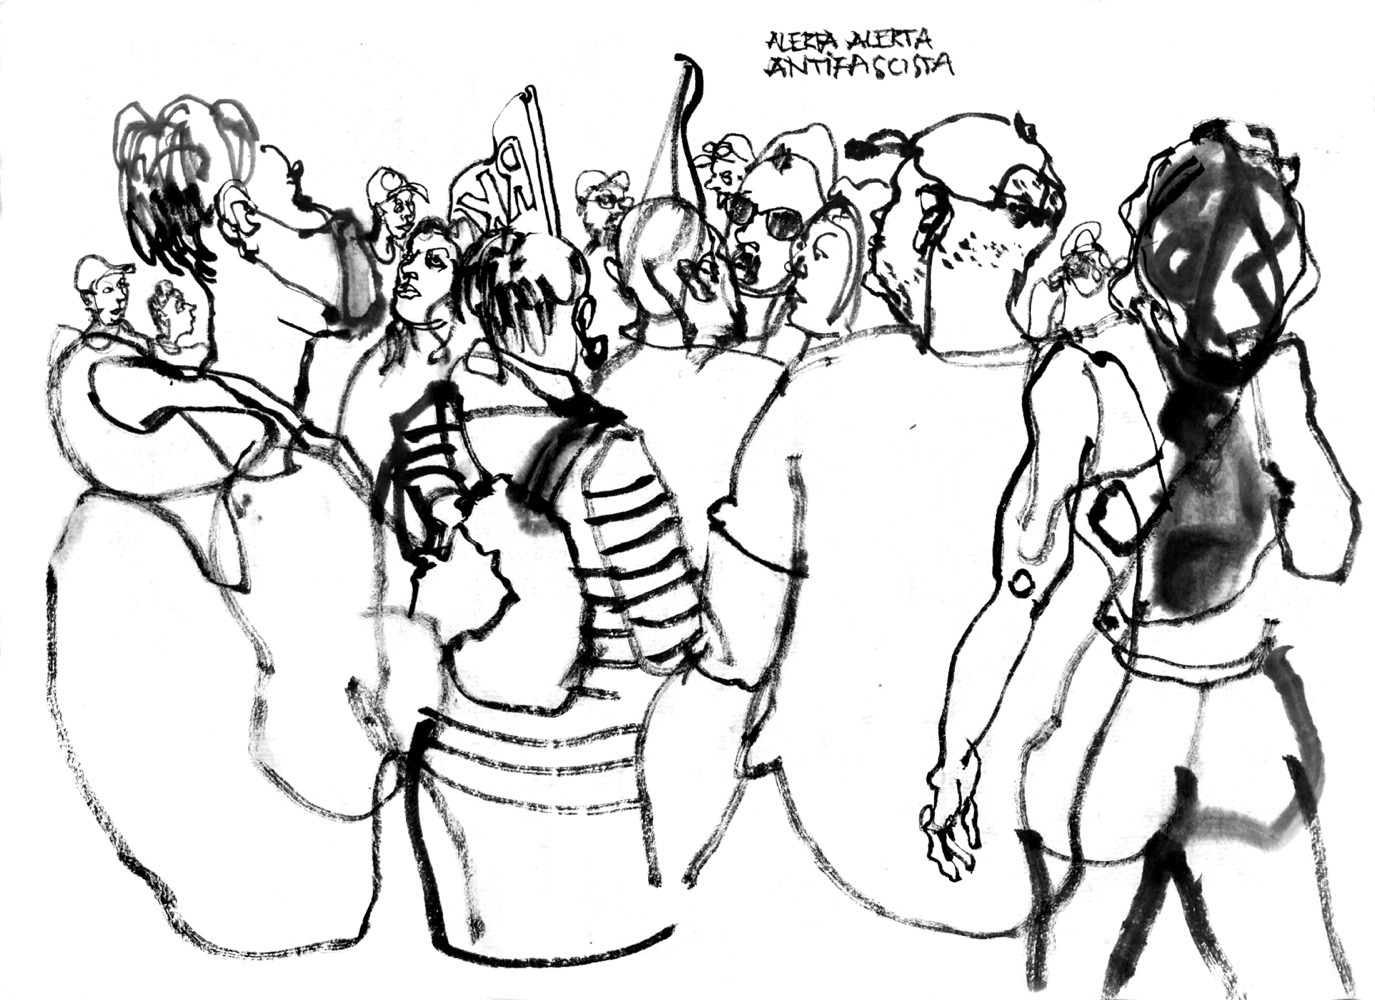 Ink drawing of a demonstration, some people masked, the slogan ‘alerta, alerta, antifascista’ written on the image.